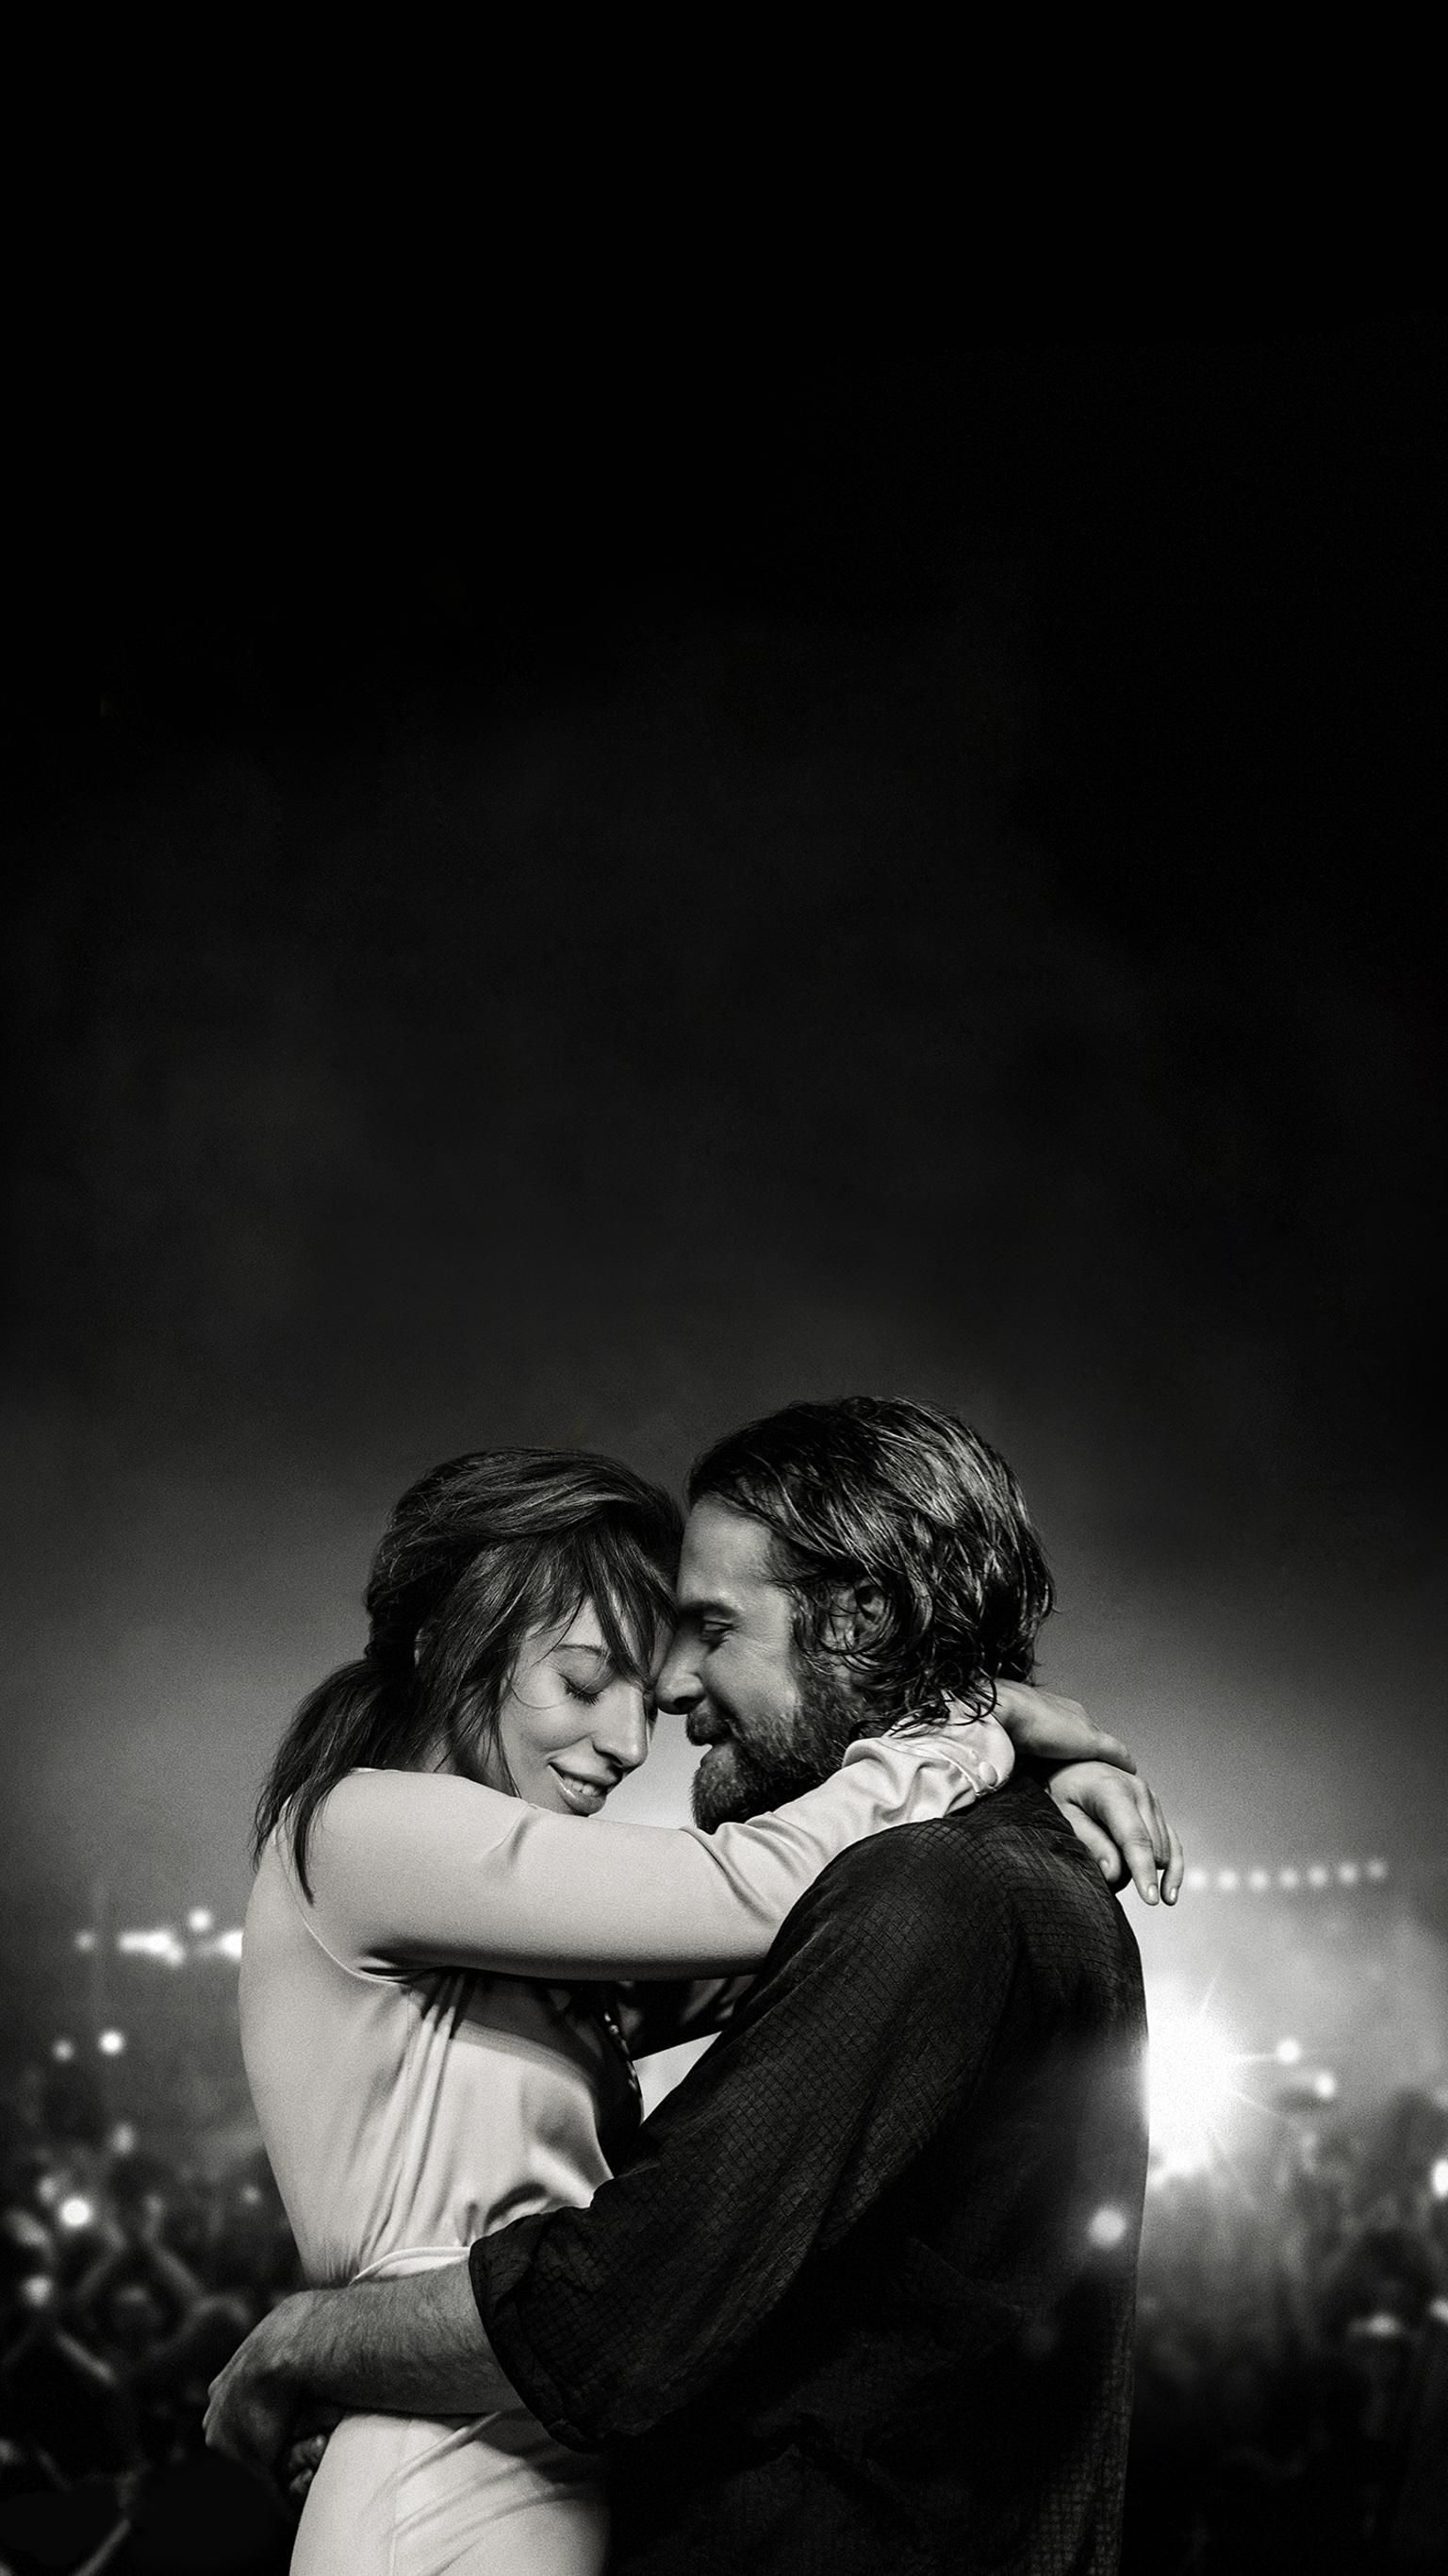 A Star Is Born: Actor Bradley Cooper's directorial debut, Love story. 1540x2740 HD Wallpaper.